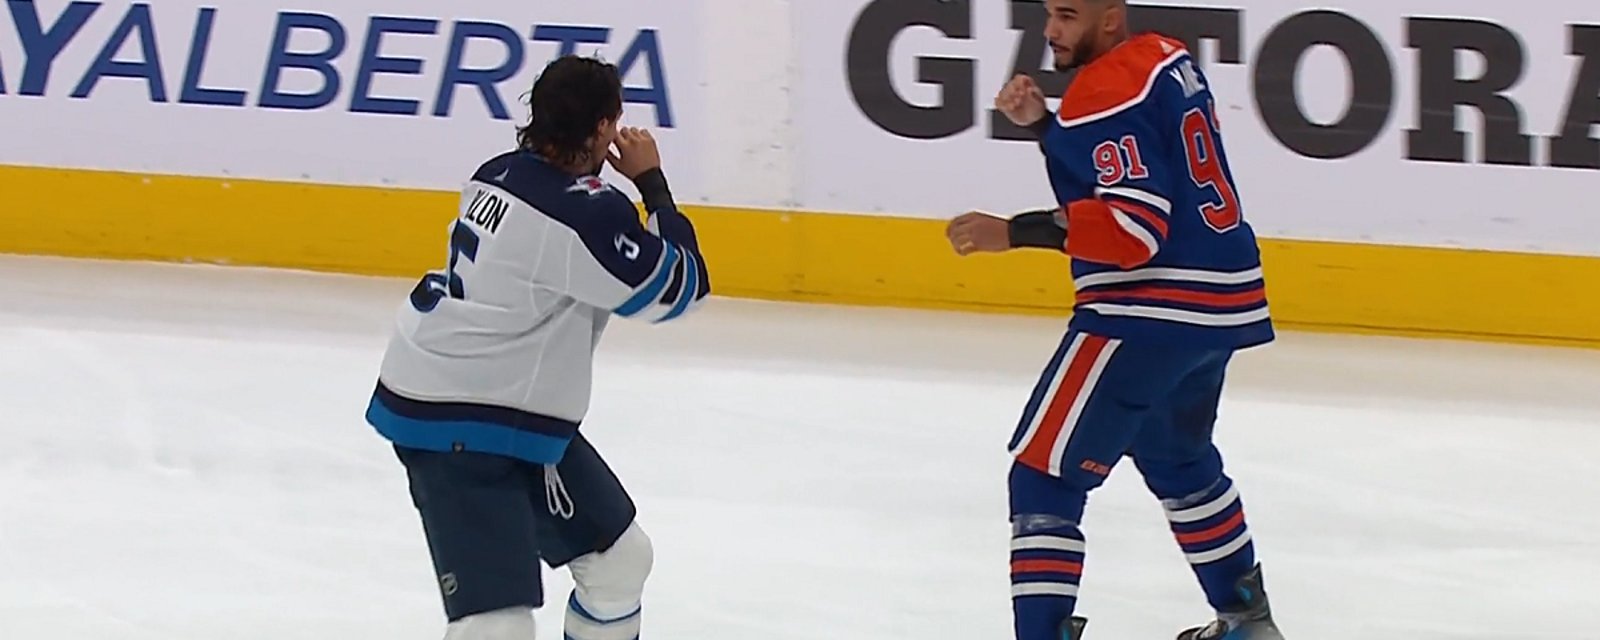 Evander Kane and Brenden Dillon drop the gloves on Saturday night.